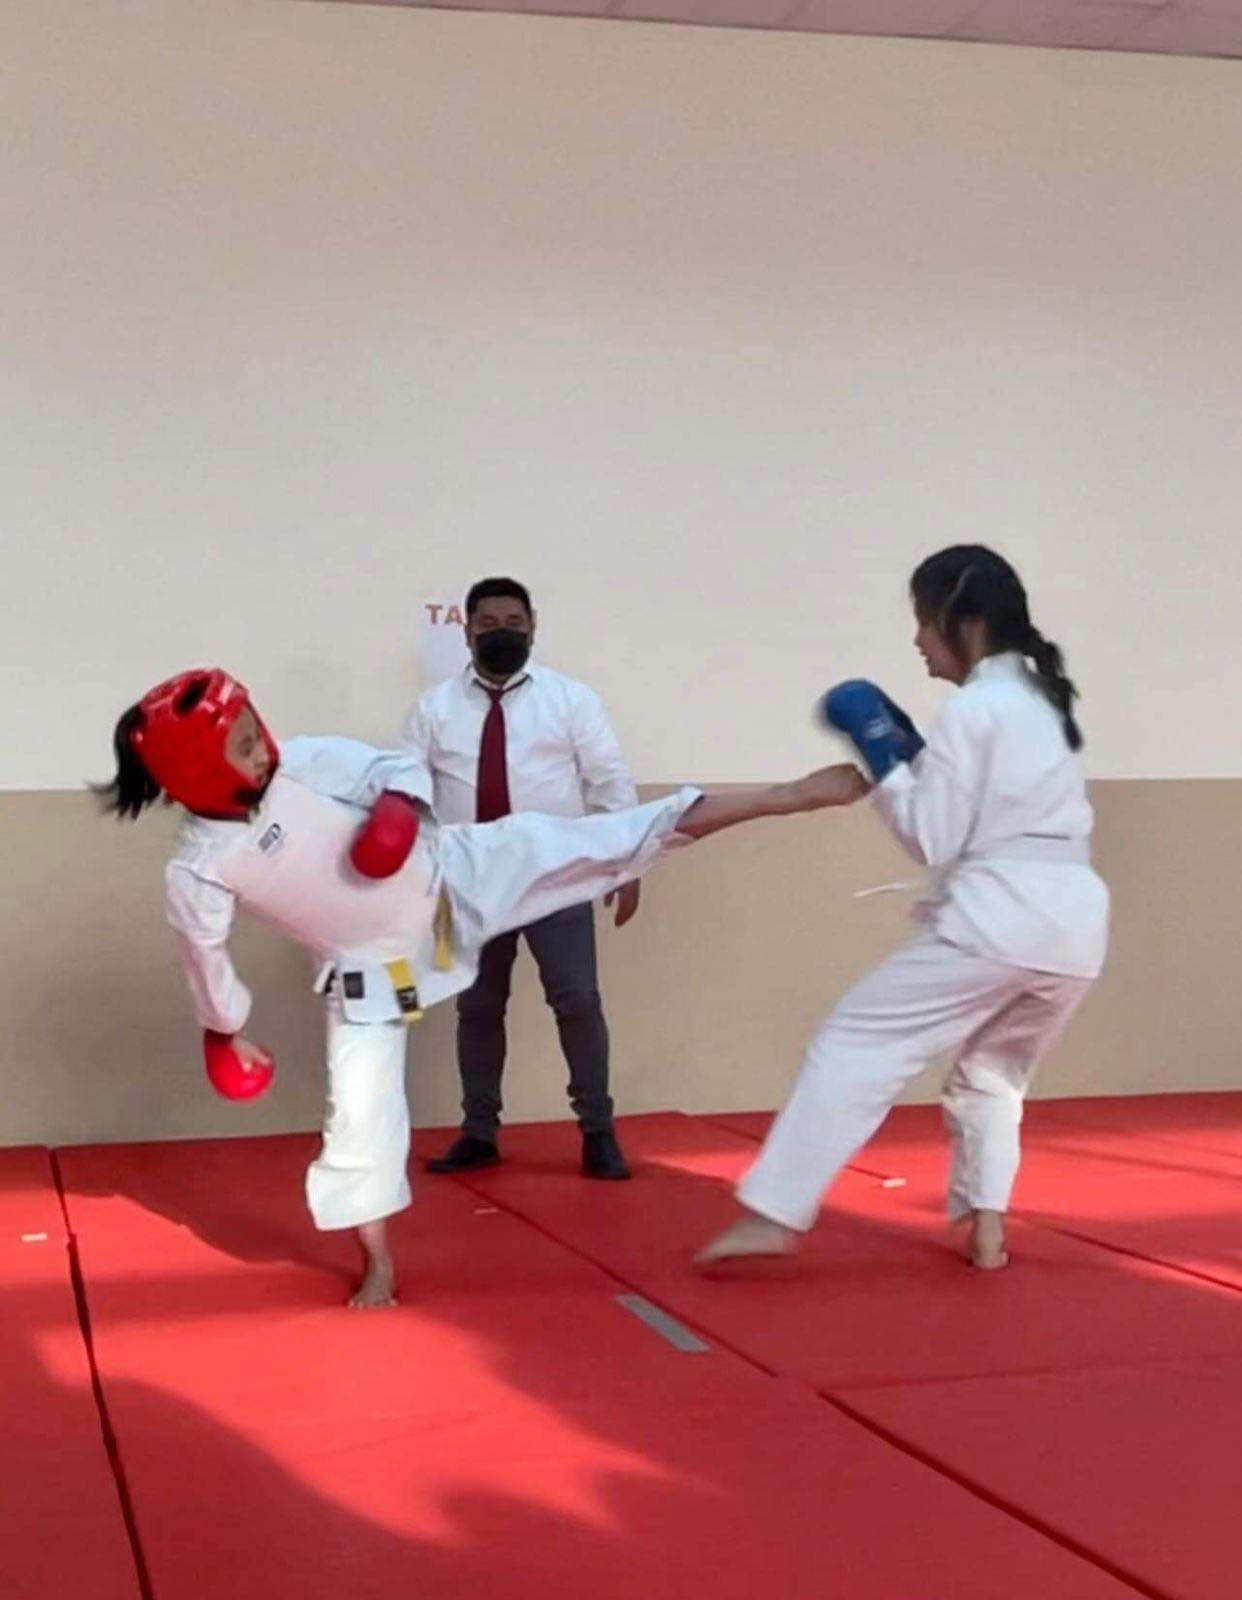 SKIF first time player who received double gold in action - Jaliyah in sparring category